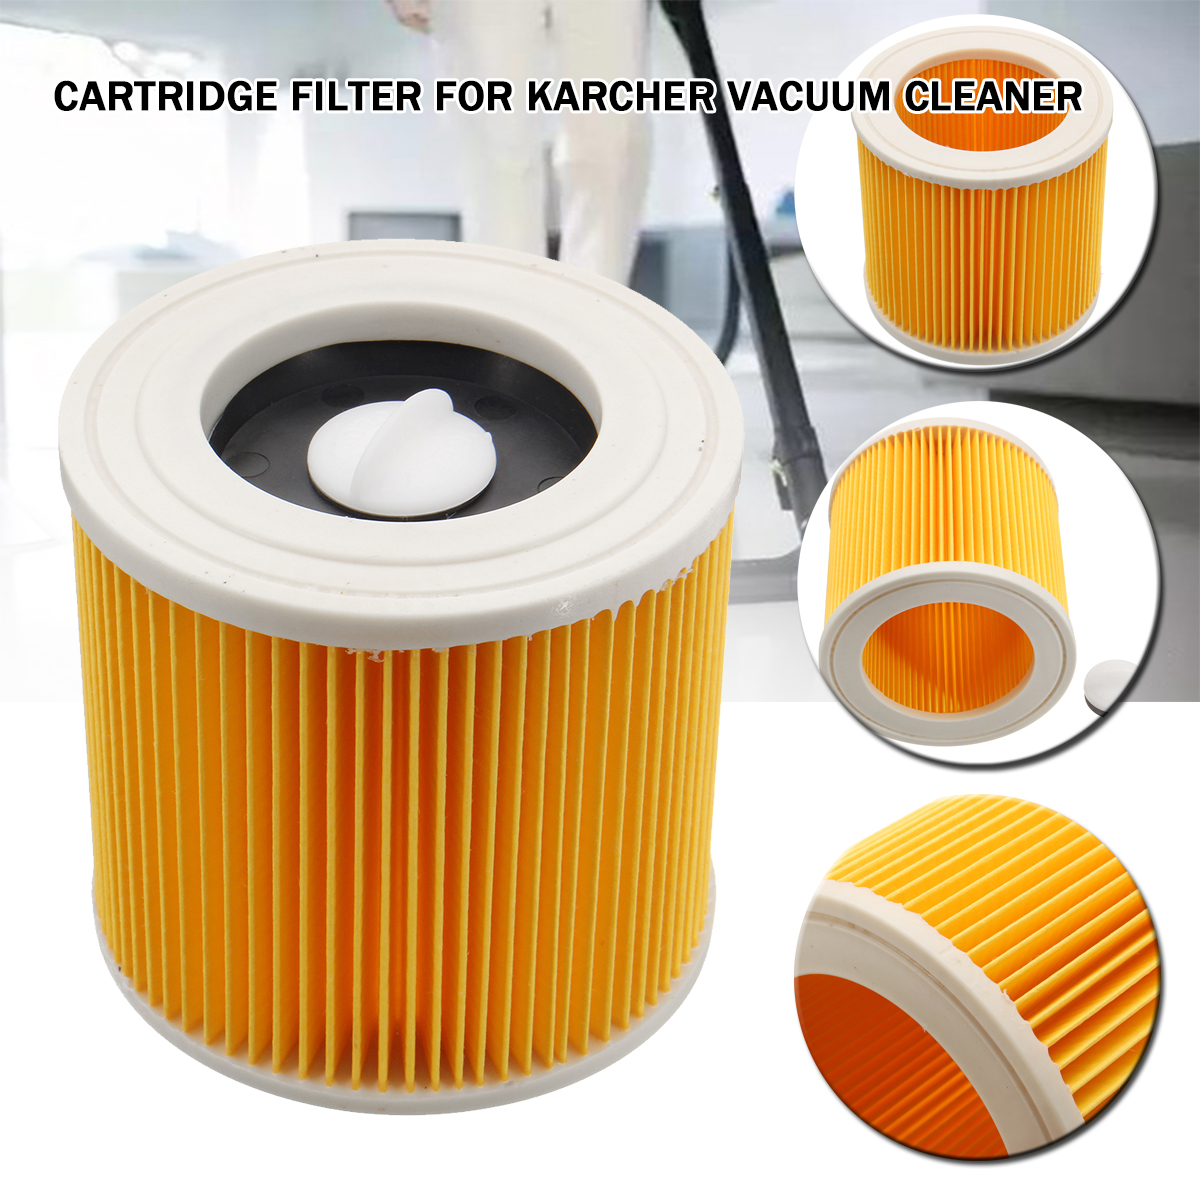 Wet-amp-Dry-Vacuum-Cleaner-Cartridge-Filter-Replacement-for-Karcher-MV2-WD2200-WD3500-A2504-A2654-1212097